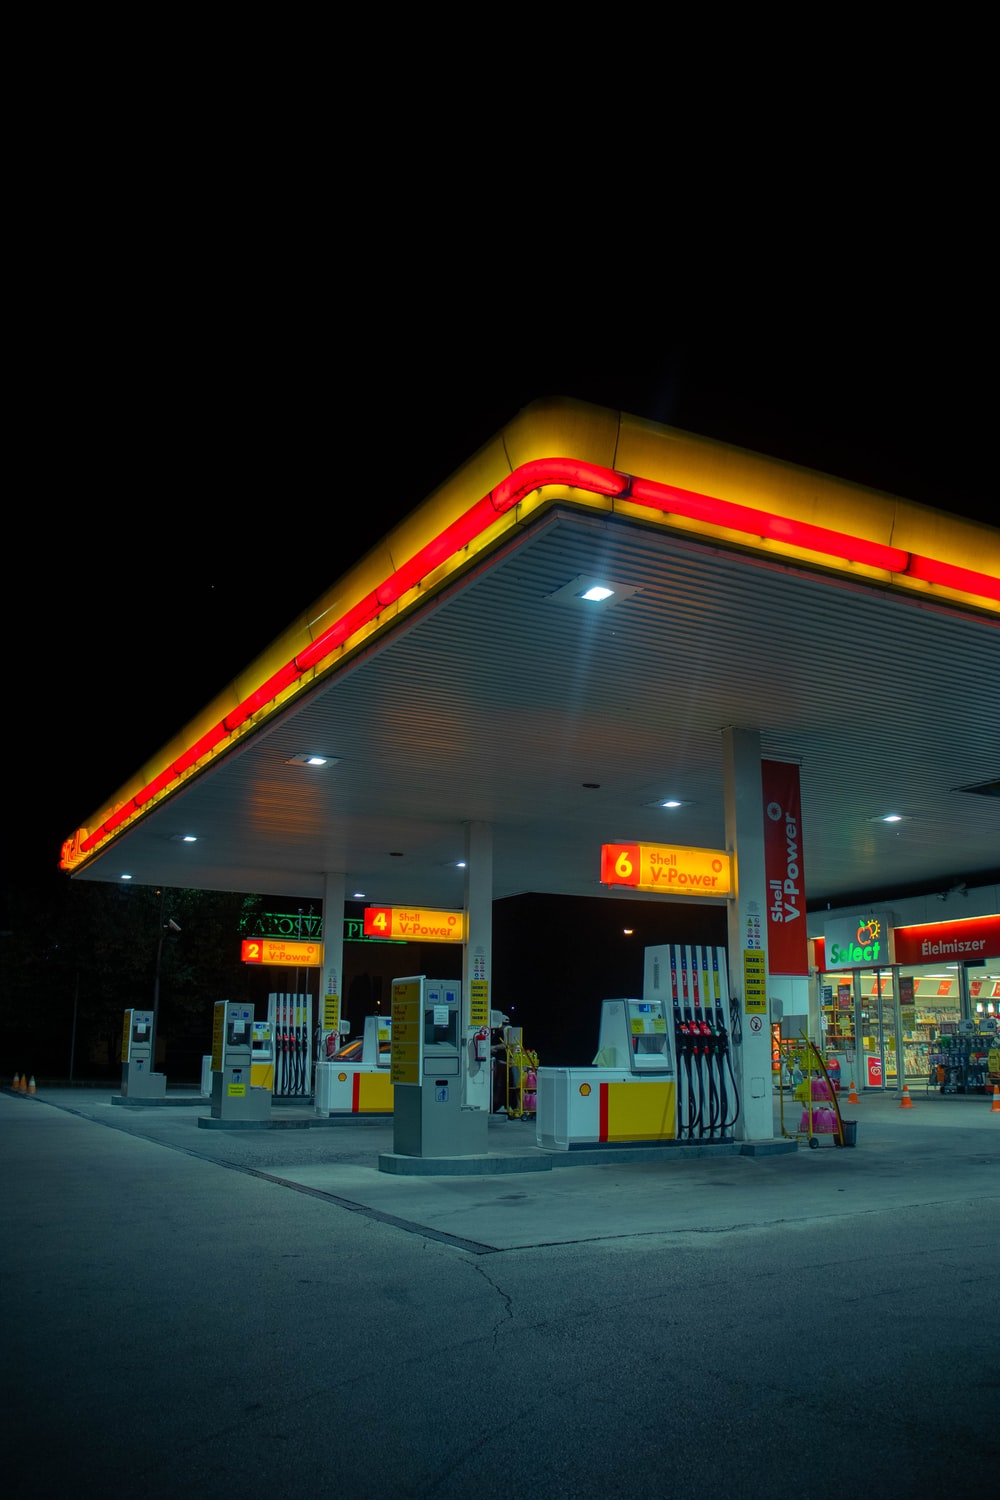 Petrol Station Picture. Download Free Image